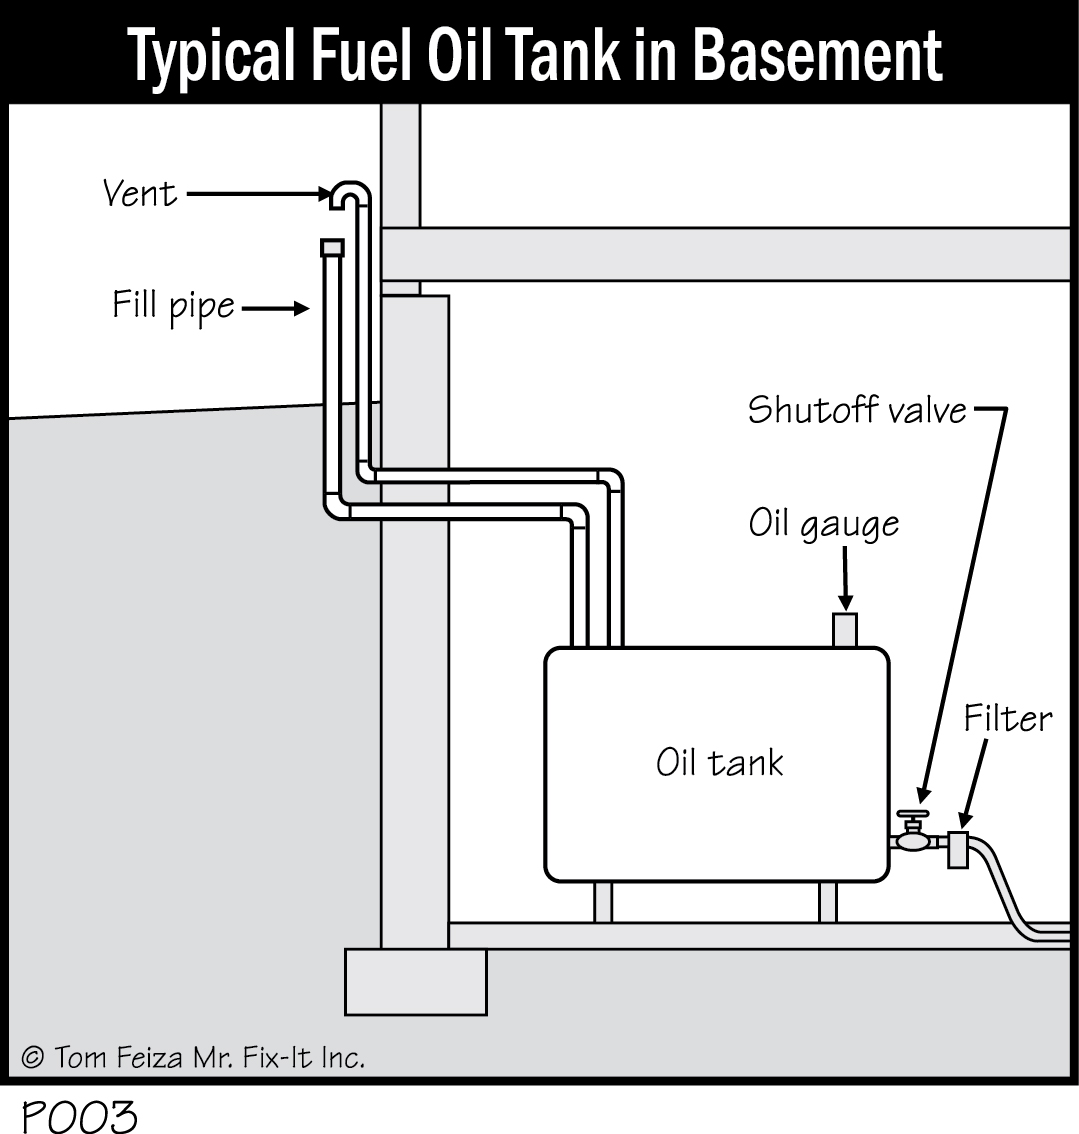 P003 - Typical Fuel Oil Tank in Basement